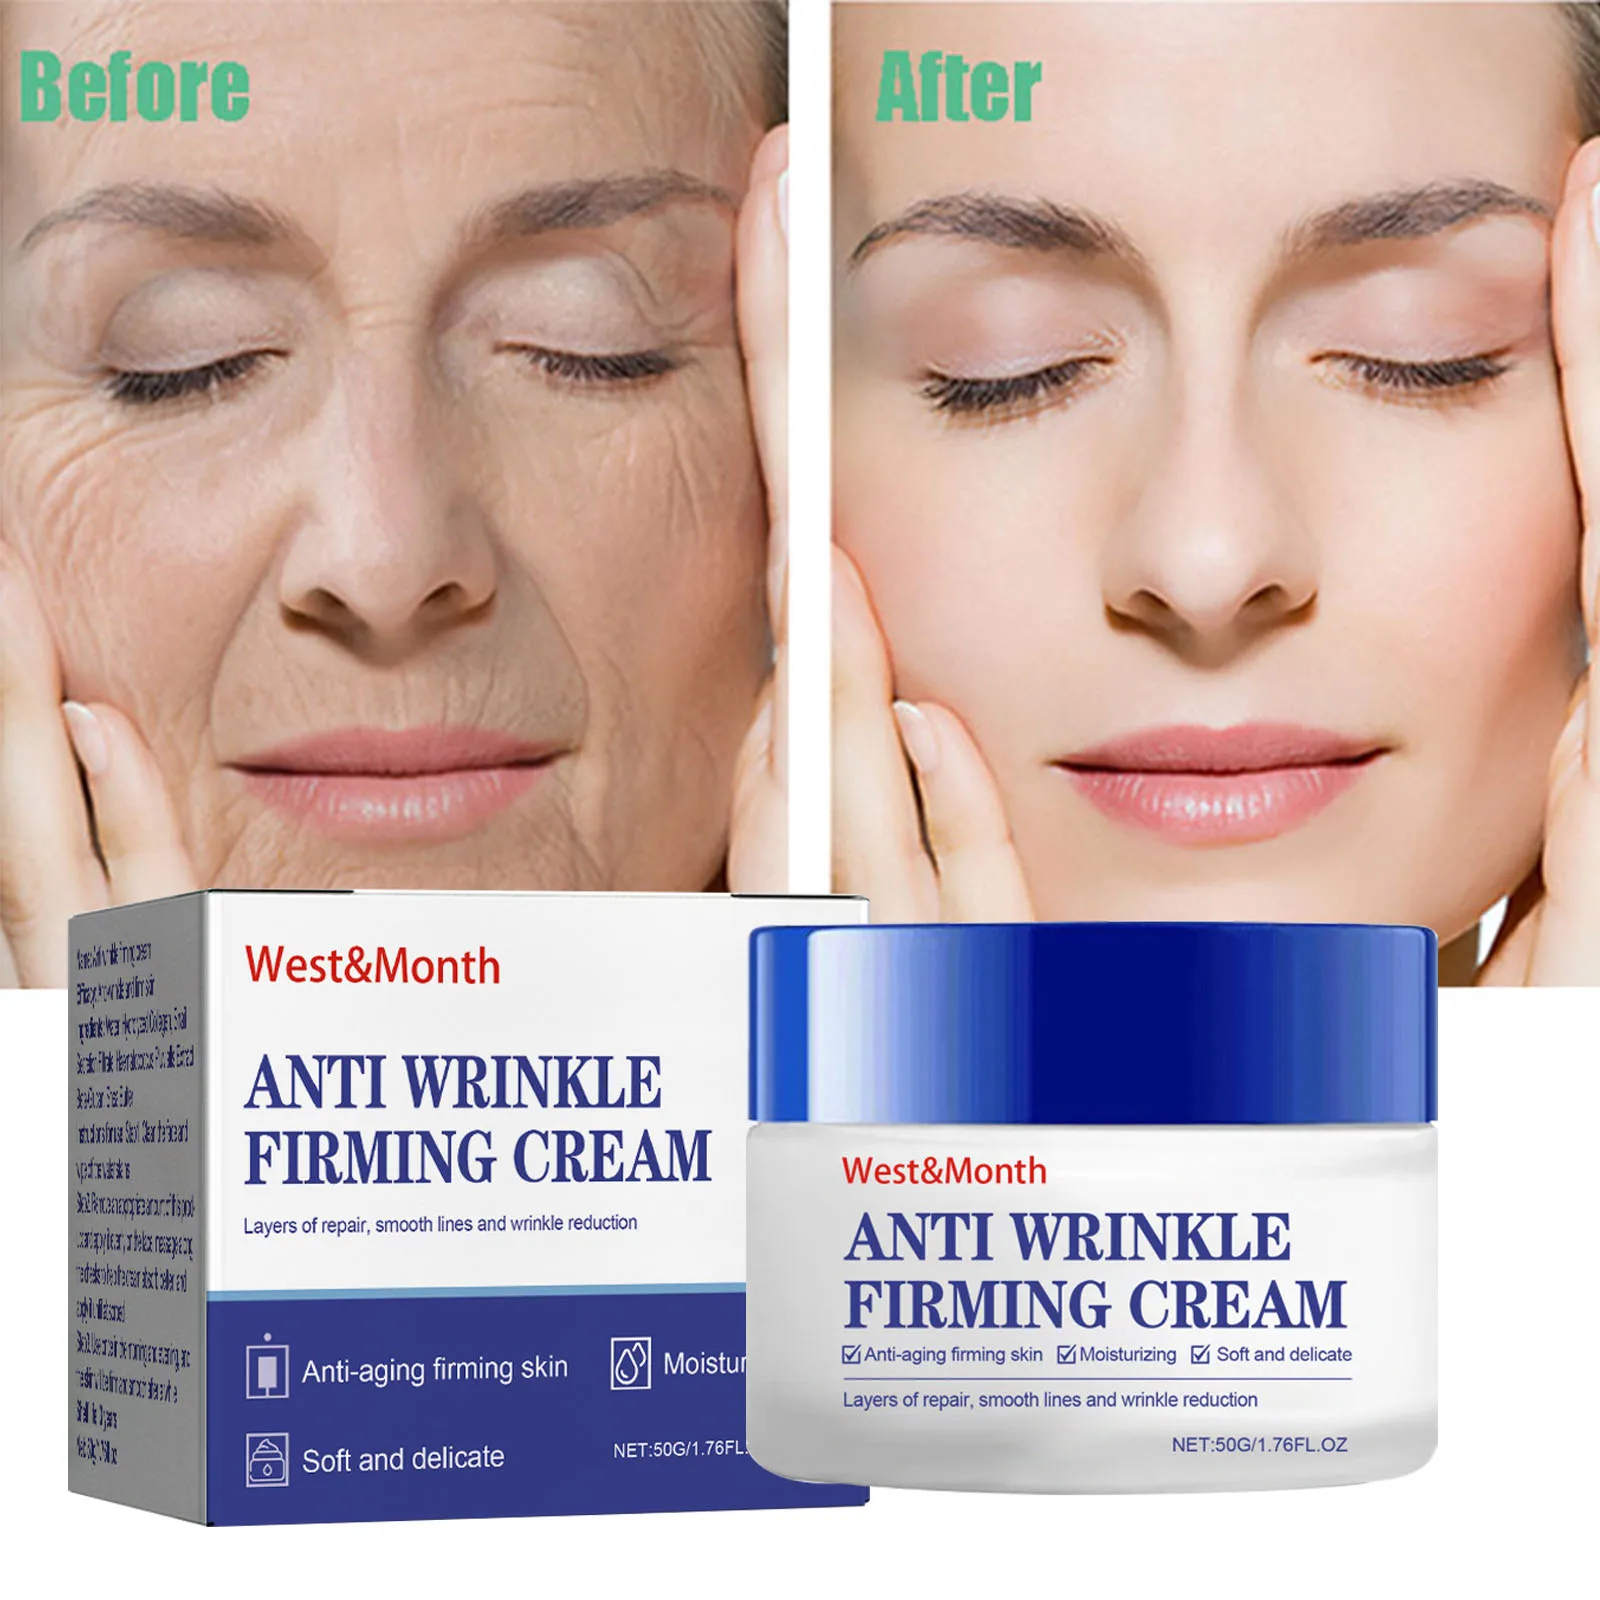 

Snail Collagen Remove Wrinkles Face Cream Fade Fine Lines Firming Anti-Aging Whitening Brighten Moisturizing Skin Care Products